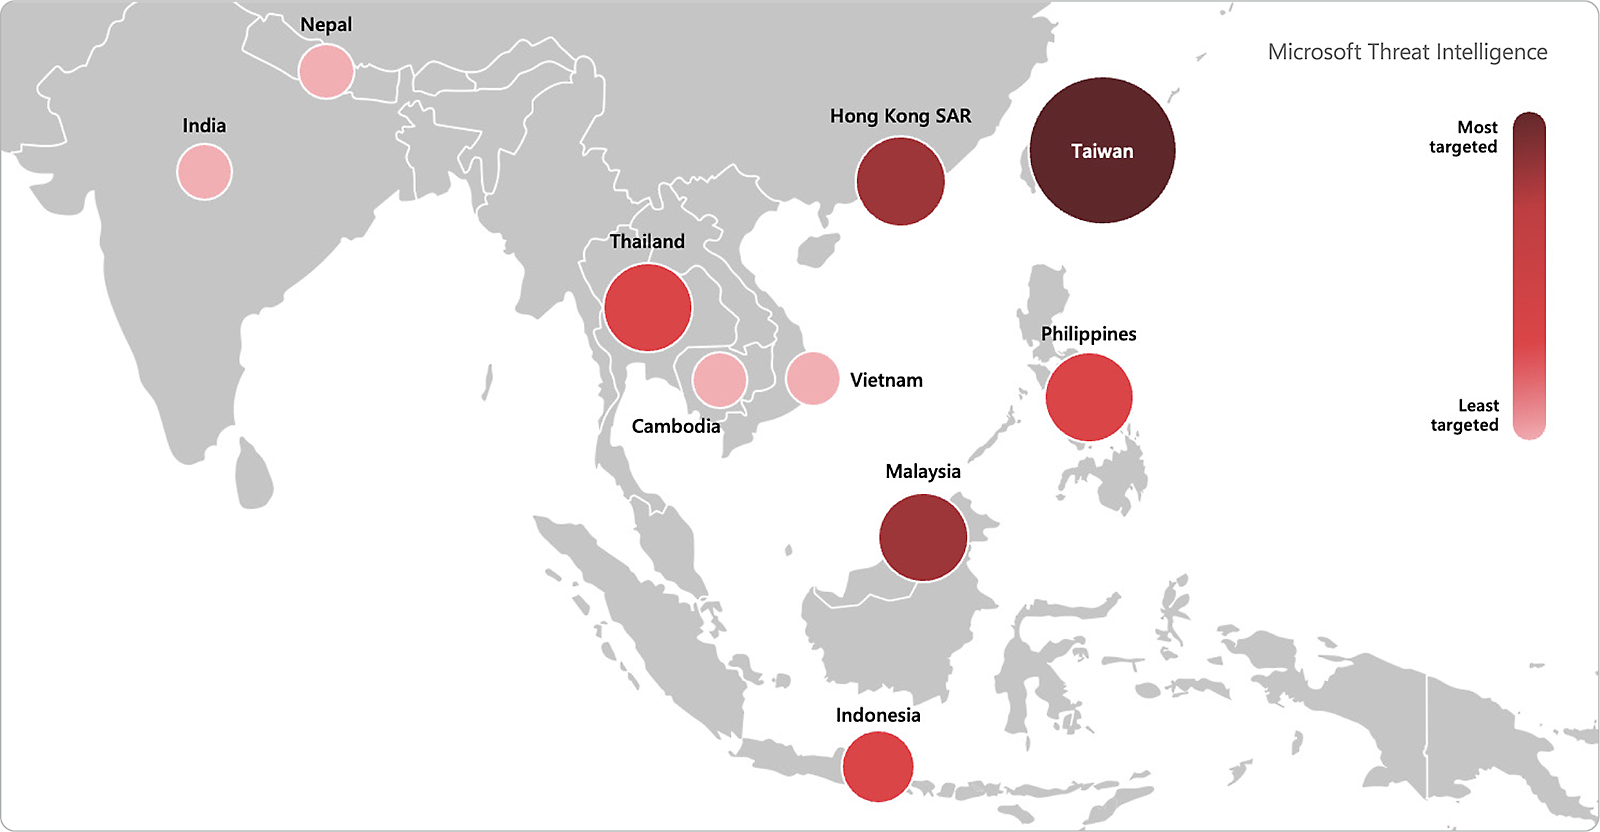 Map displaying microsoft threat intelligence data on the most targeted regions in asia, 